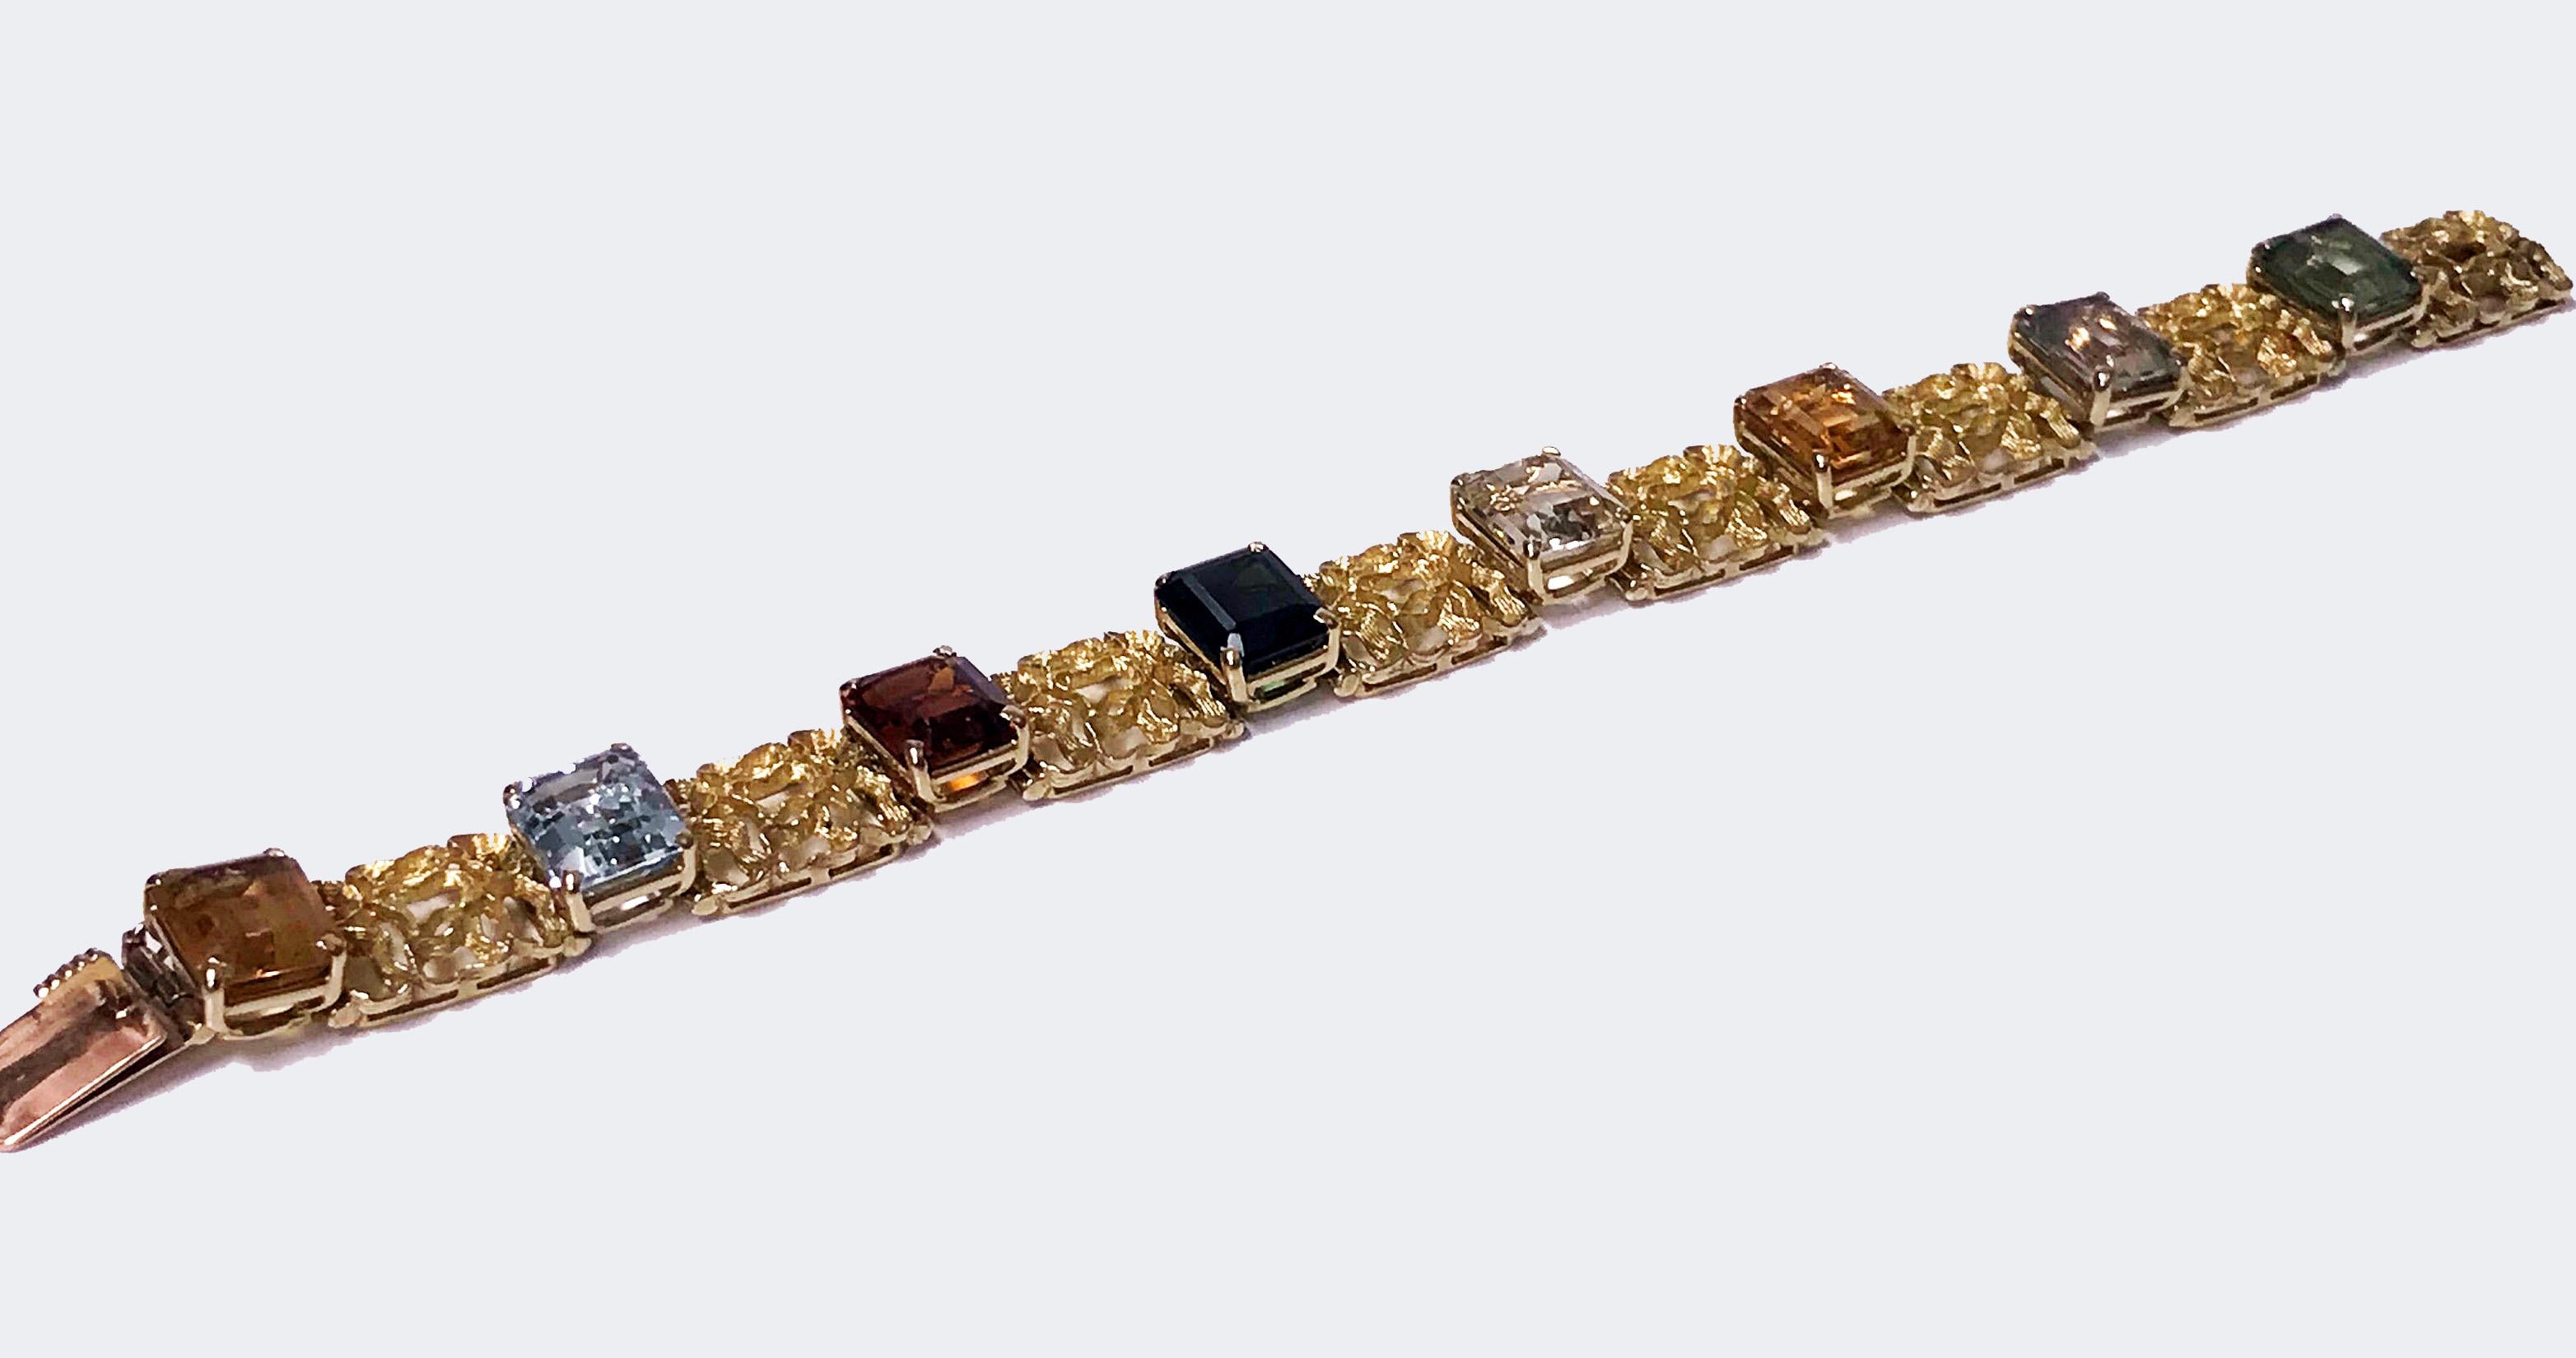 18K multi gem Bracelet, H. Stern, 20th century. The Bracelet with open textured rectangular links interspaced with eight rectangular claw set gemstones including aquamarine, green tourmaline, diopside and citrine. Stamped 750- and S within lozenge